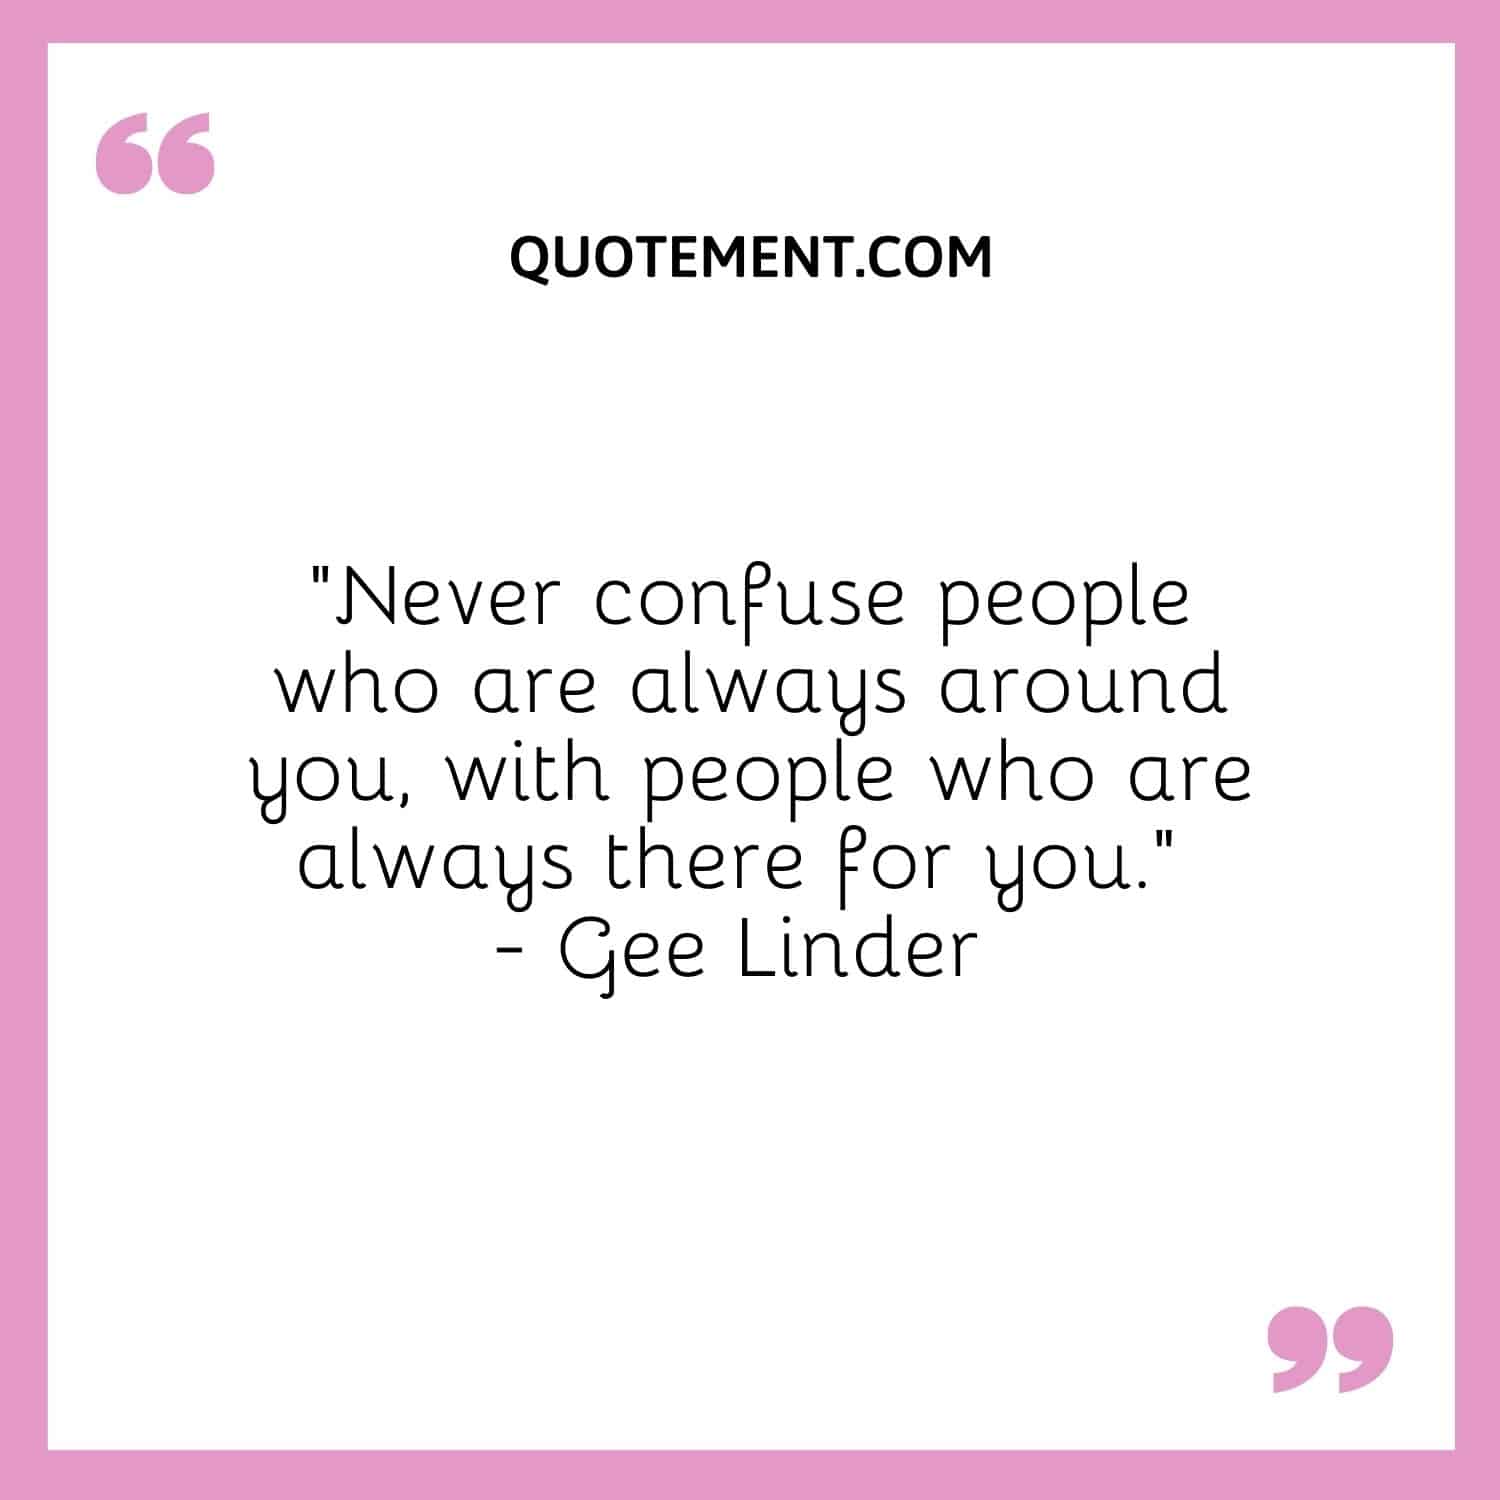 Never confuse people who are always around you, with people who are always there for you. — Gee Linder 